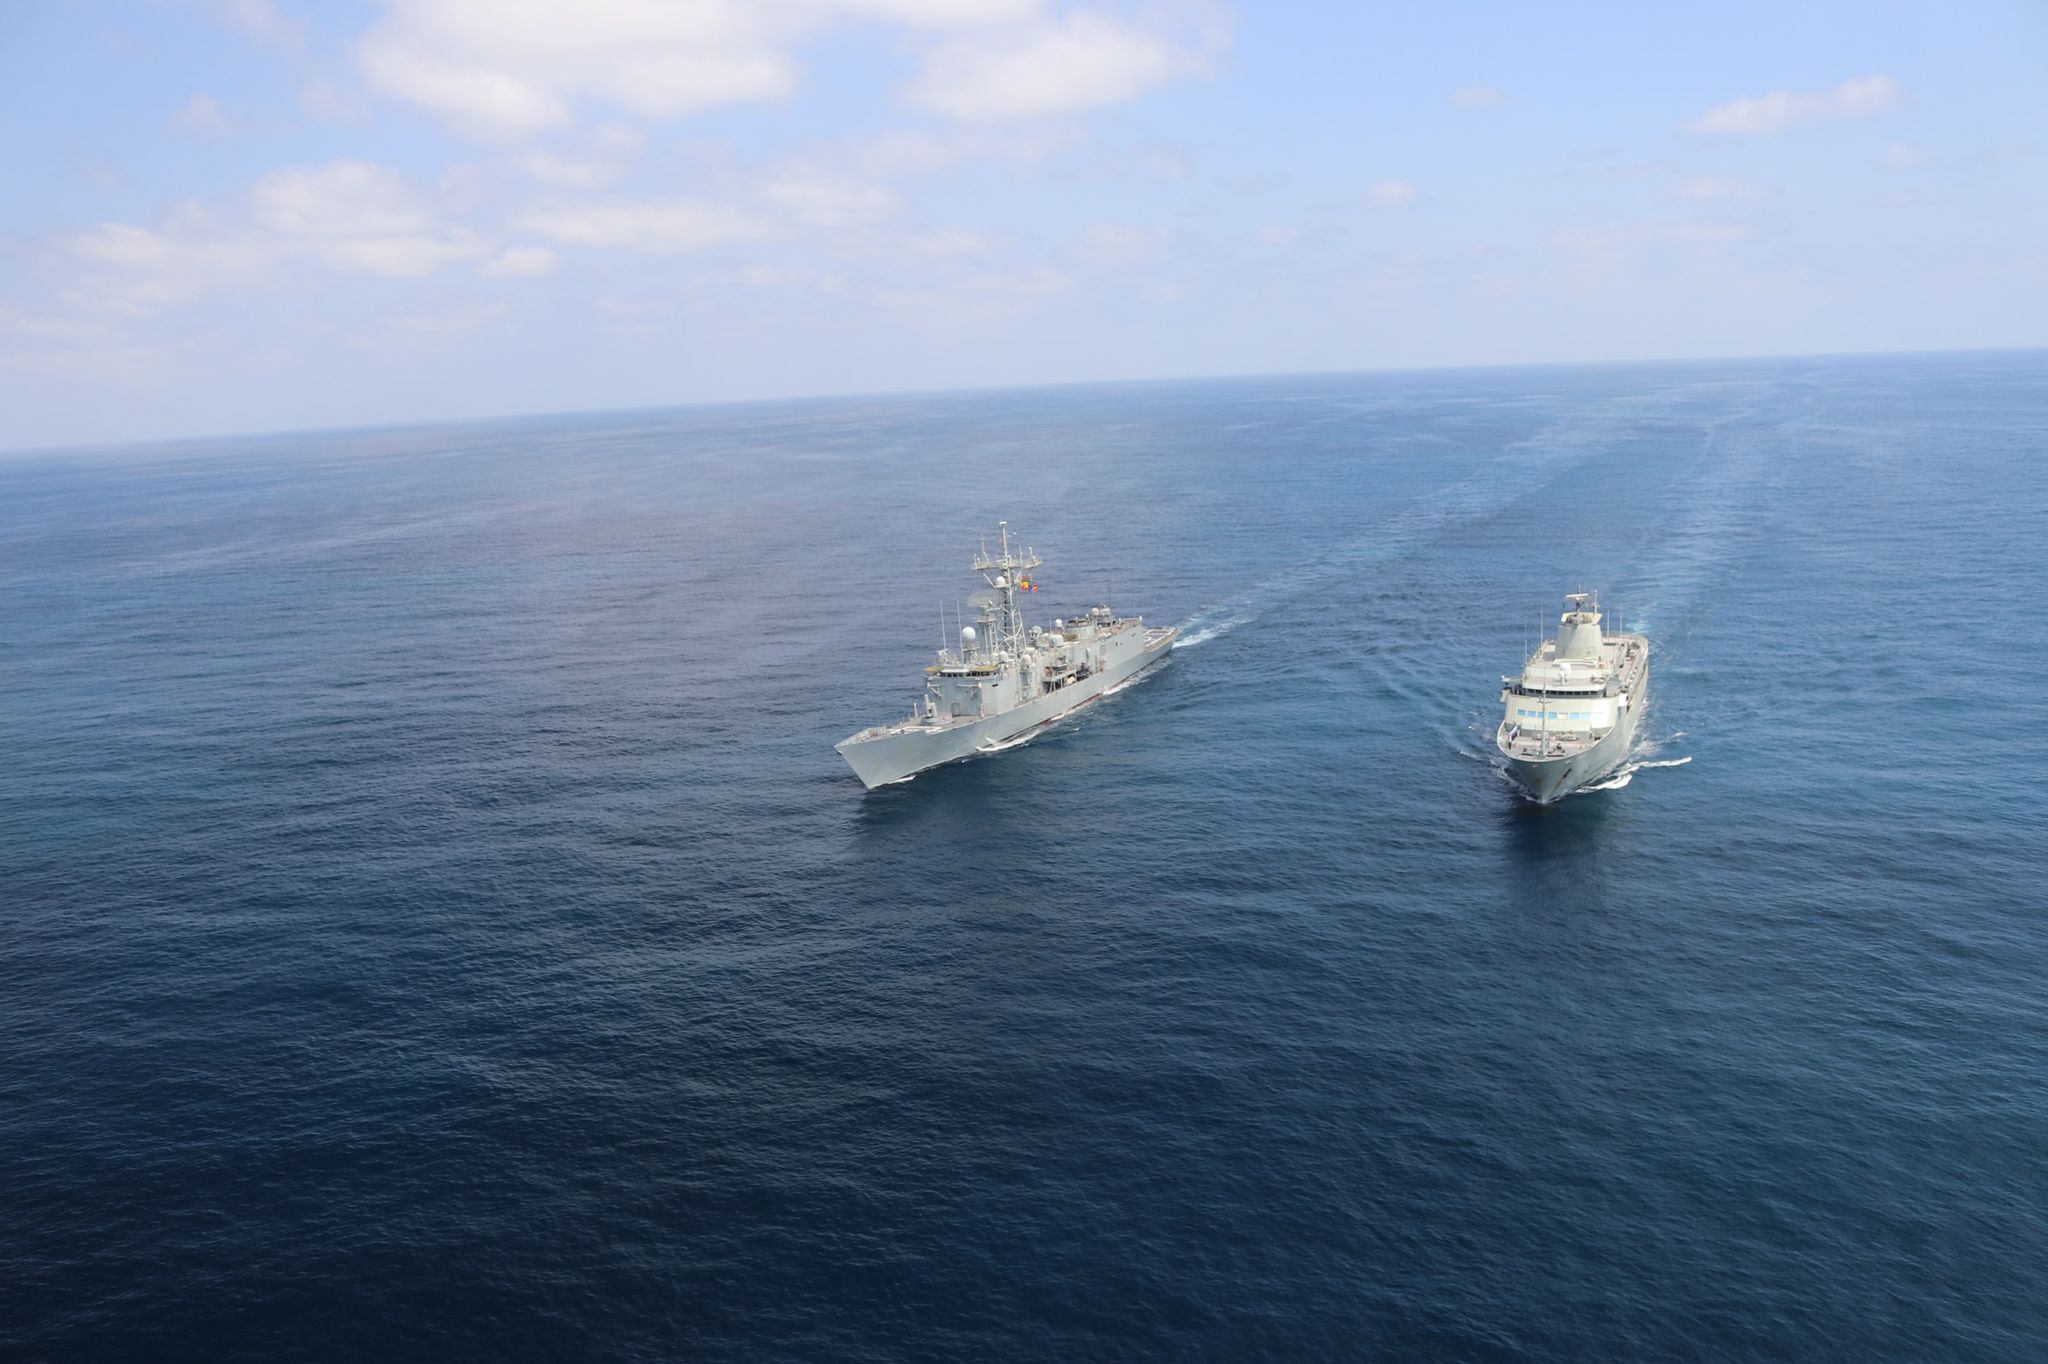 EU NAVFOR Somalia conducts a joint naval exercise with the Sultanate of Oman October 20, 2021 - 10:36